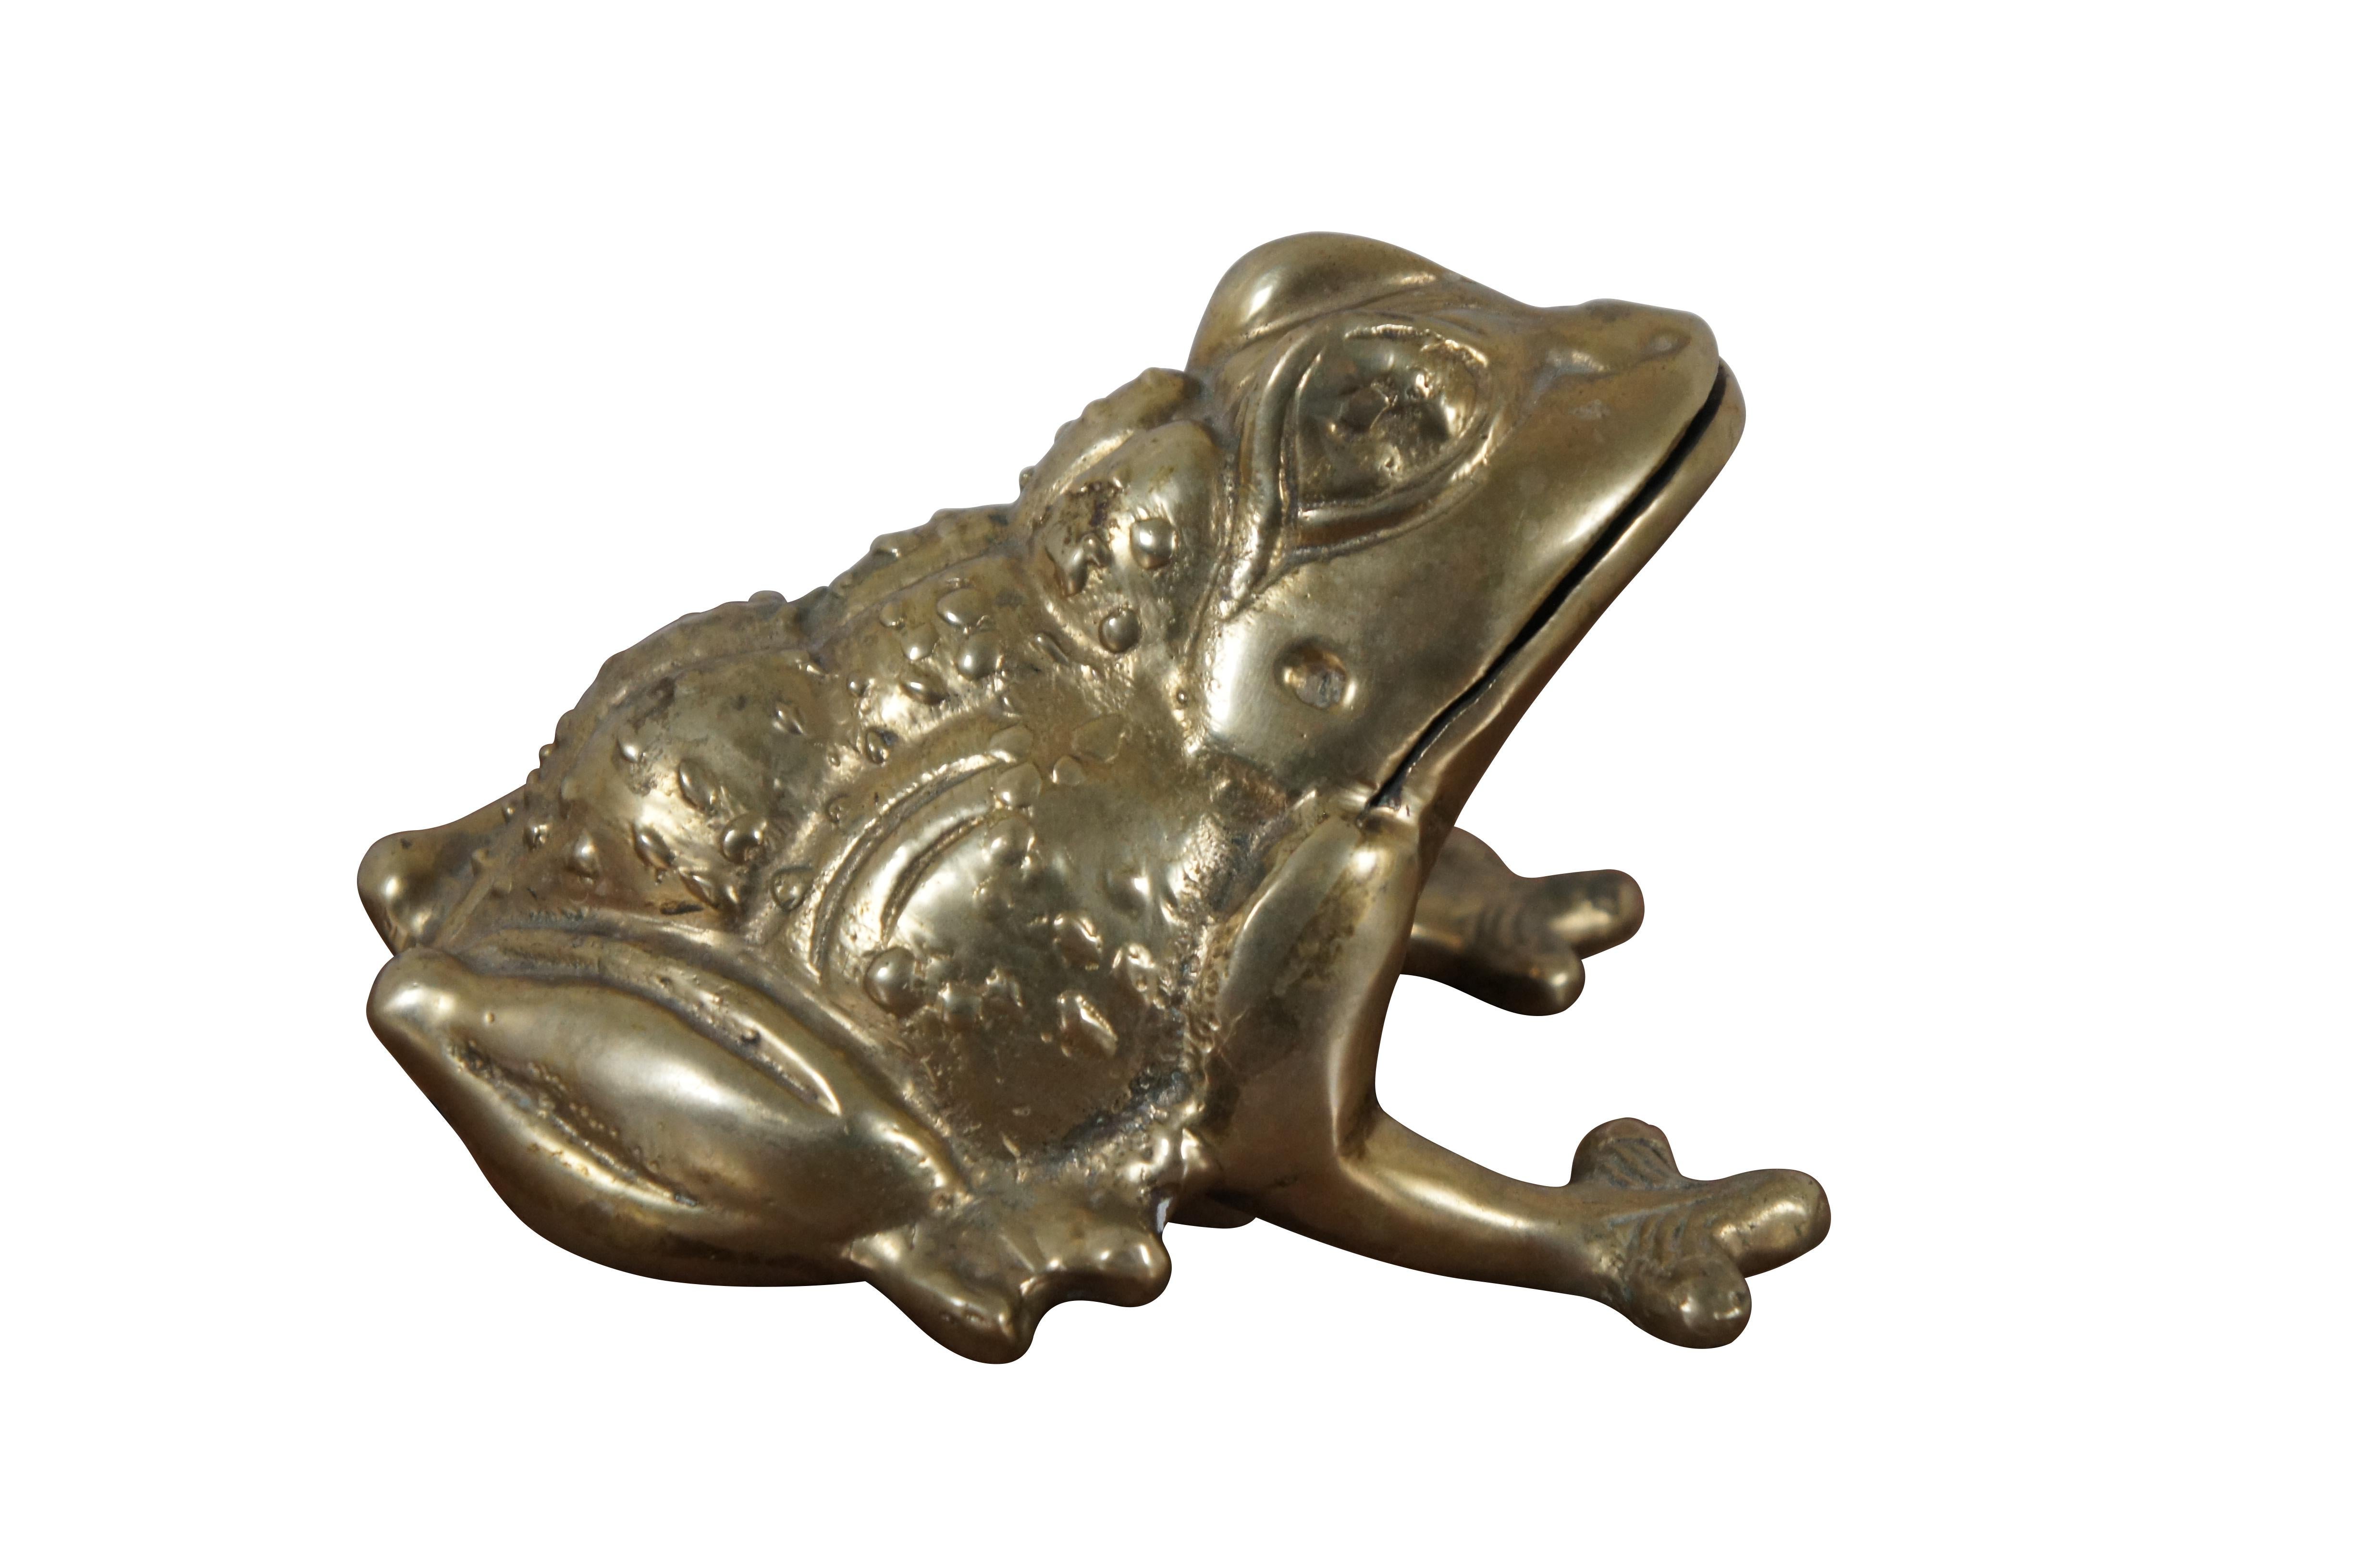 Vintage bright brass desktop figurine / paperweight in the shape of a frog / toad with a wart covered back and a mouth slit that could accommodate a note / letter.

Dimensions:
5.5